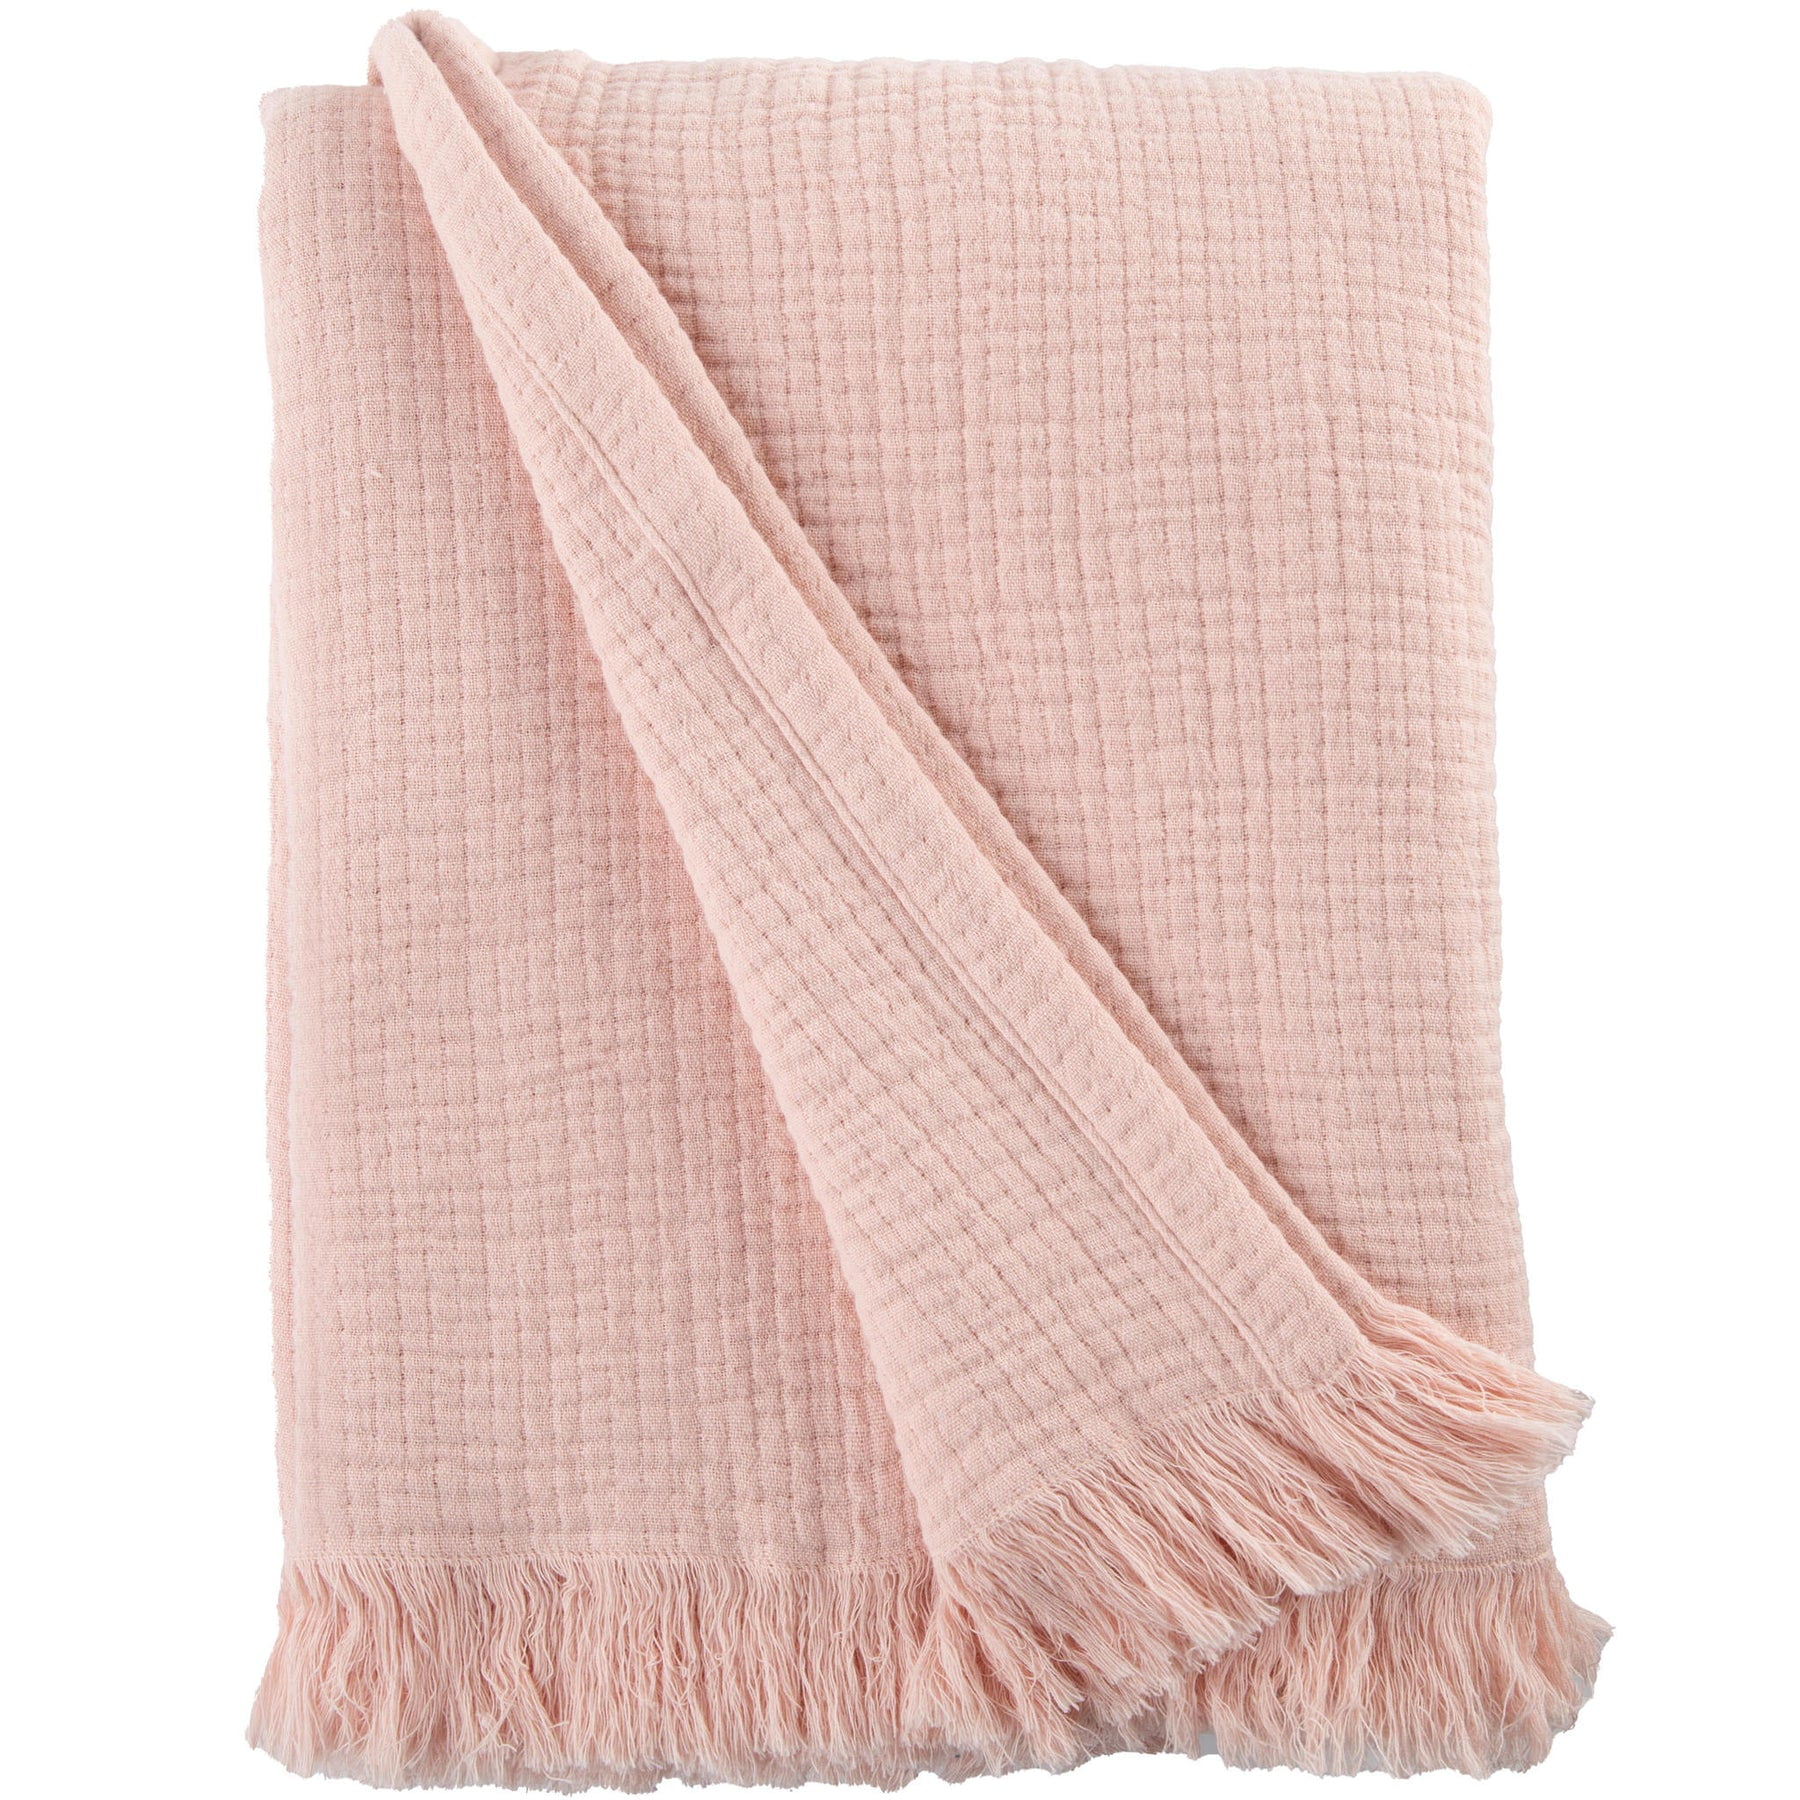 Sticky Toffee Muslin Throw Blanket for Adults, 100% Cotton, 60x50 in, Soft Lightweight and Breathable Throw for Couch, Blush Pink